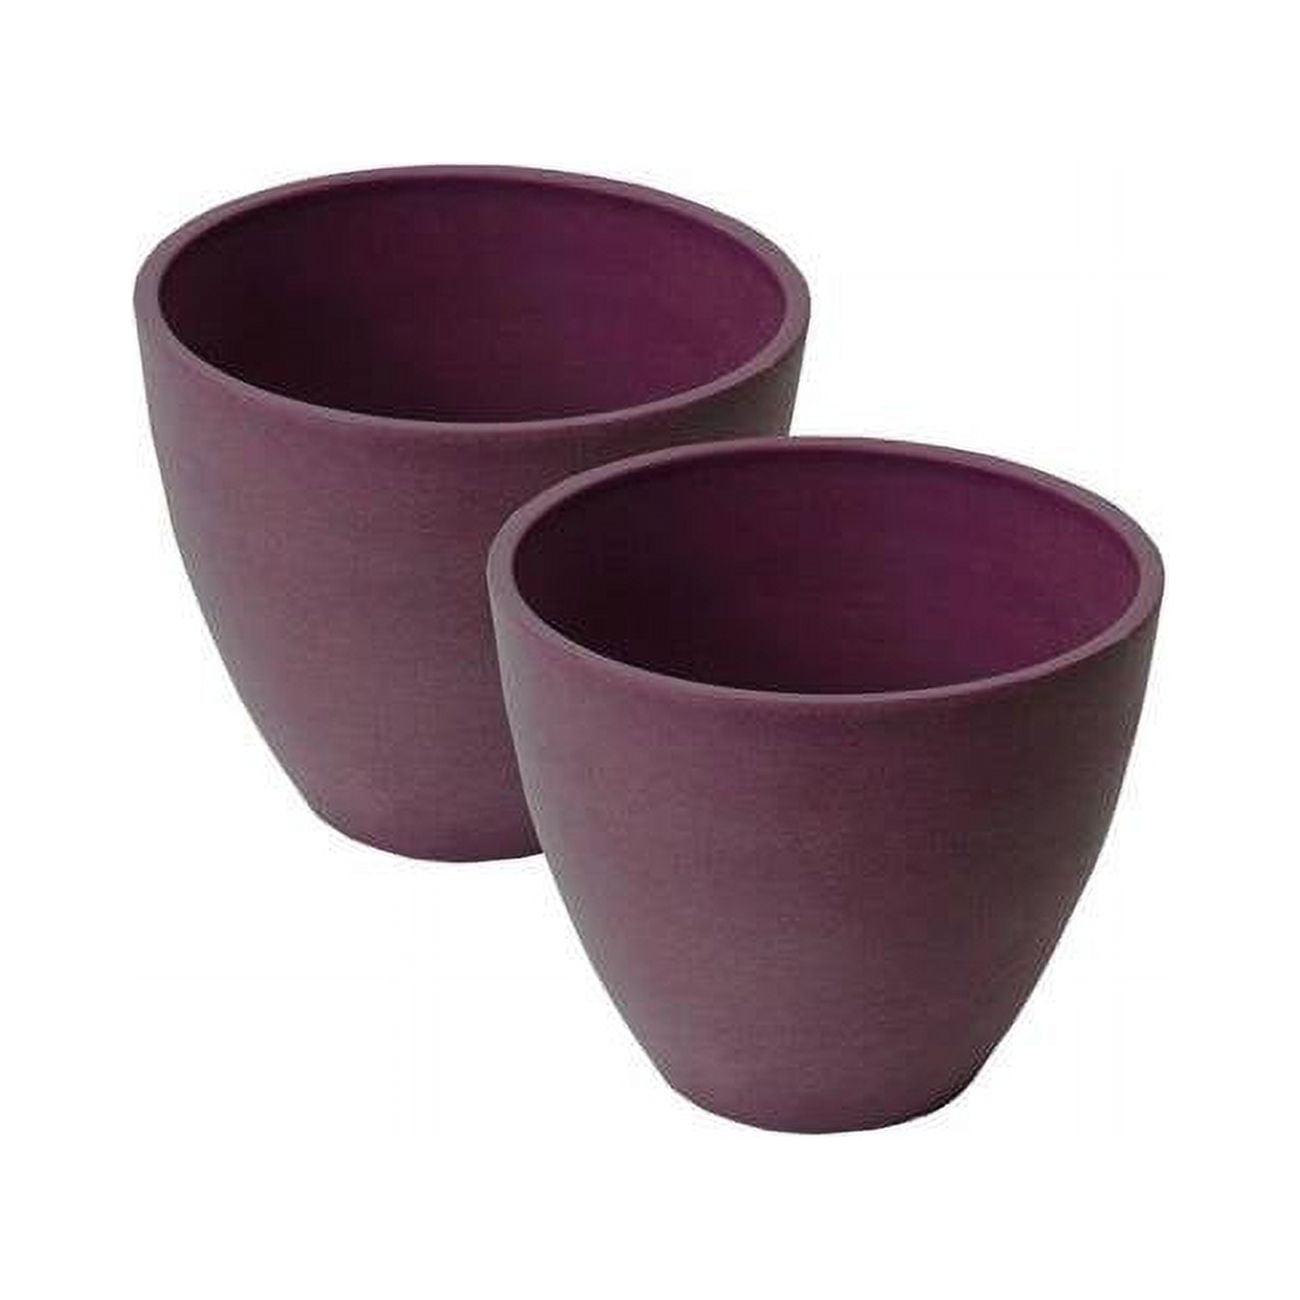 23526 Valencia 10 In. Dia. By 8.3 In. Height 2 Round Taper Curve Planters, Spun Purple - Pack Of 2